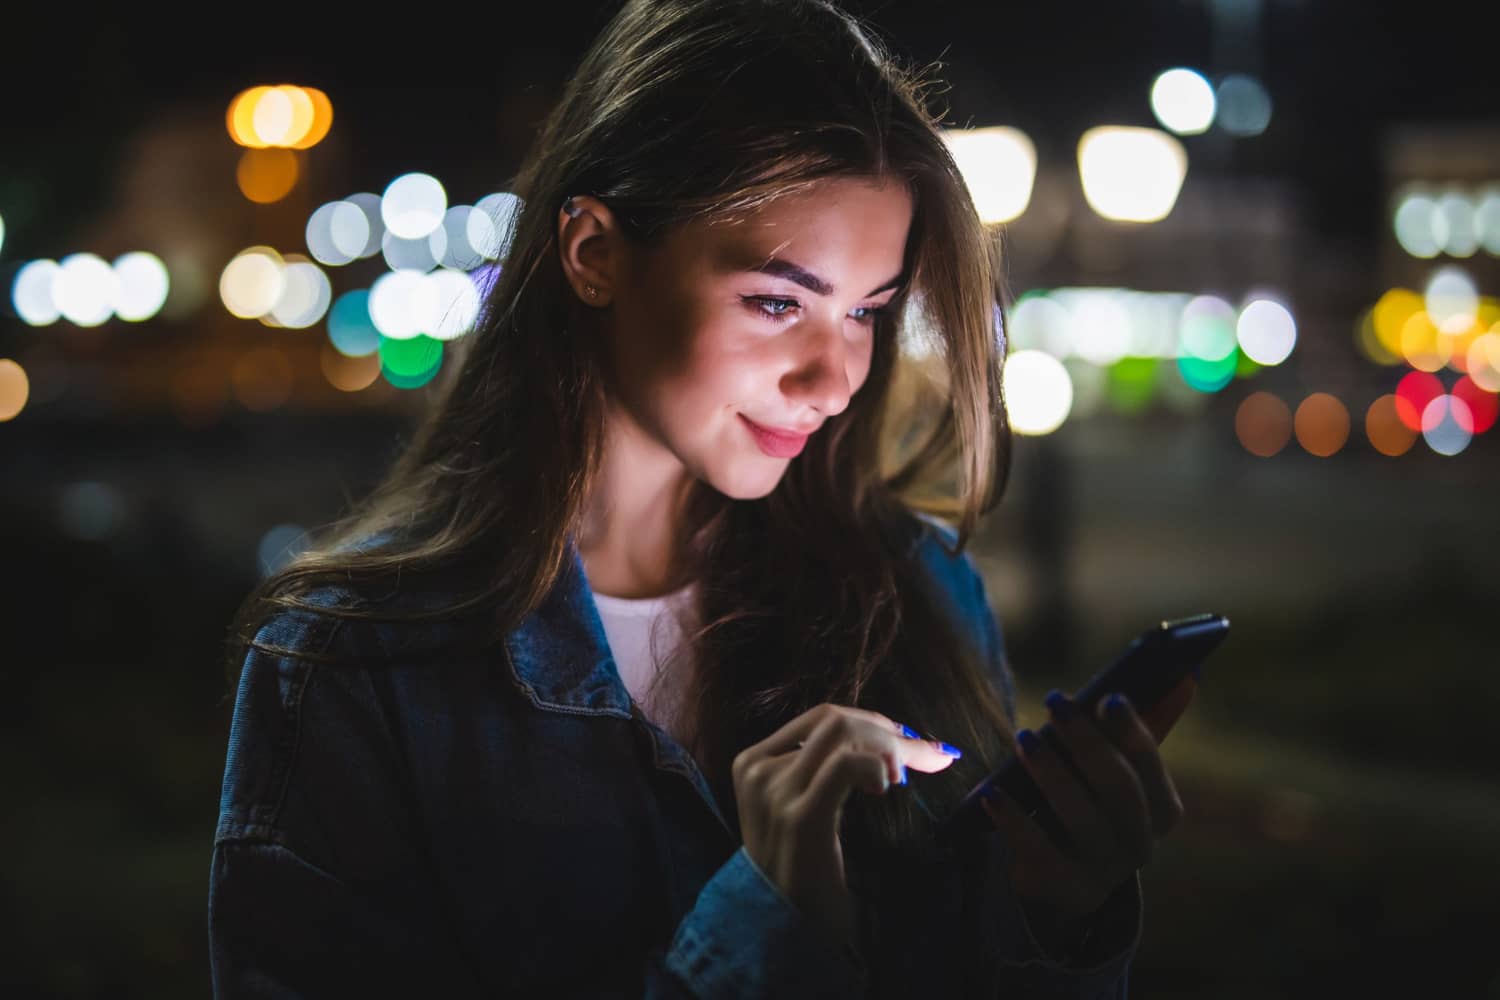 A girl using a smartphone at night in the street with beautiful lights.